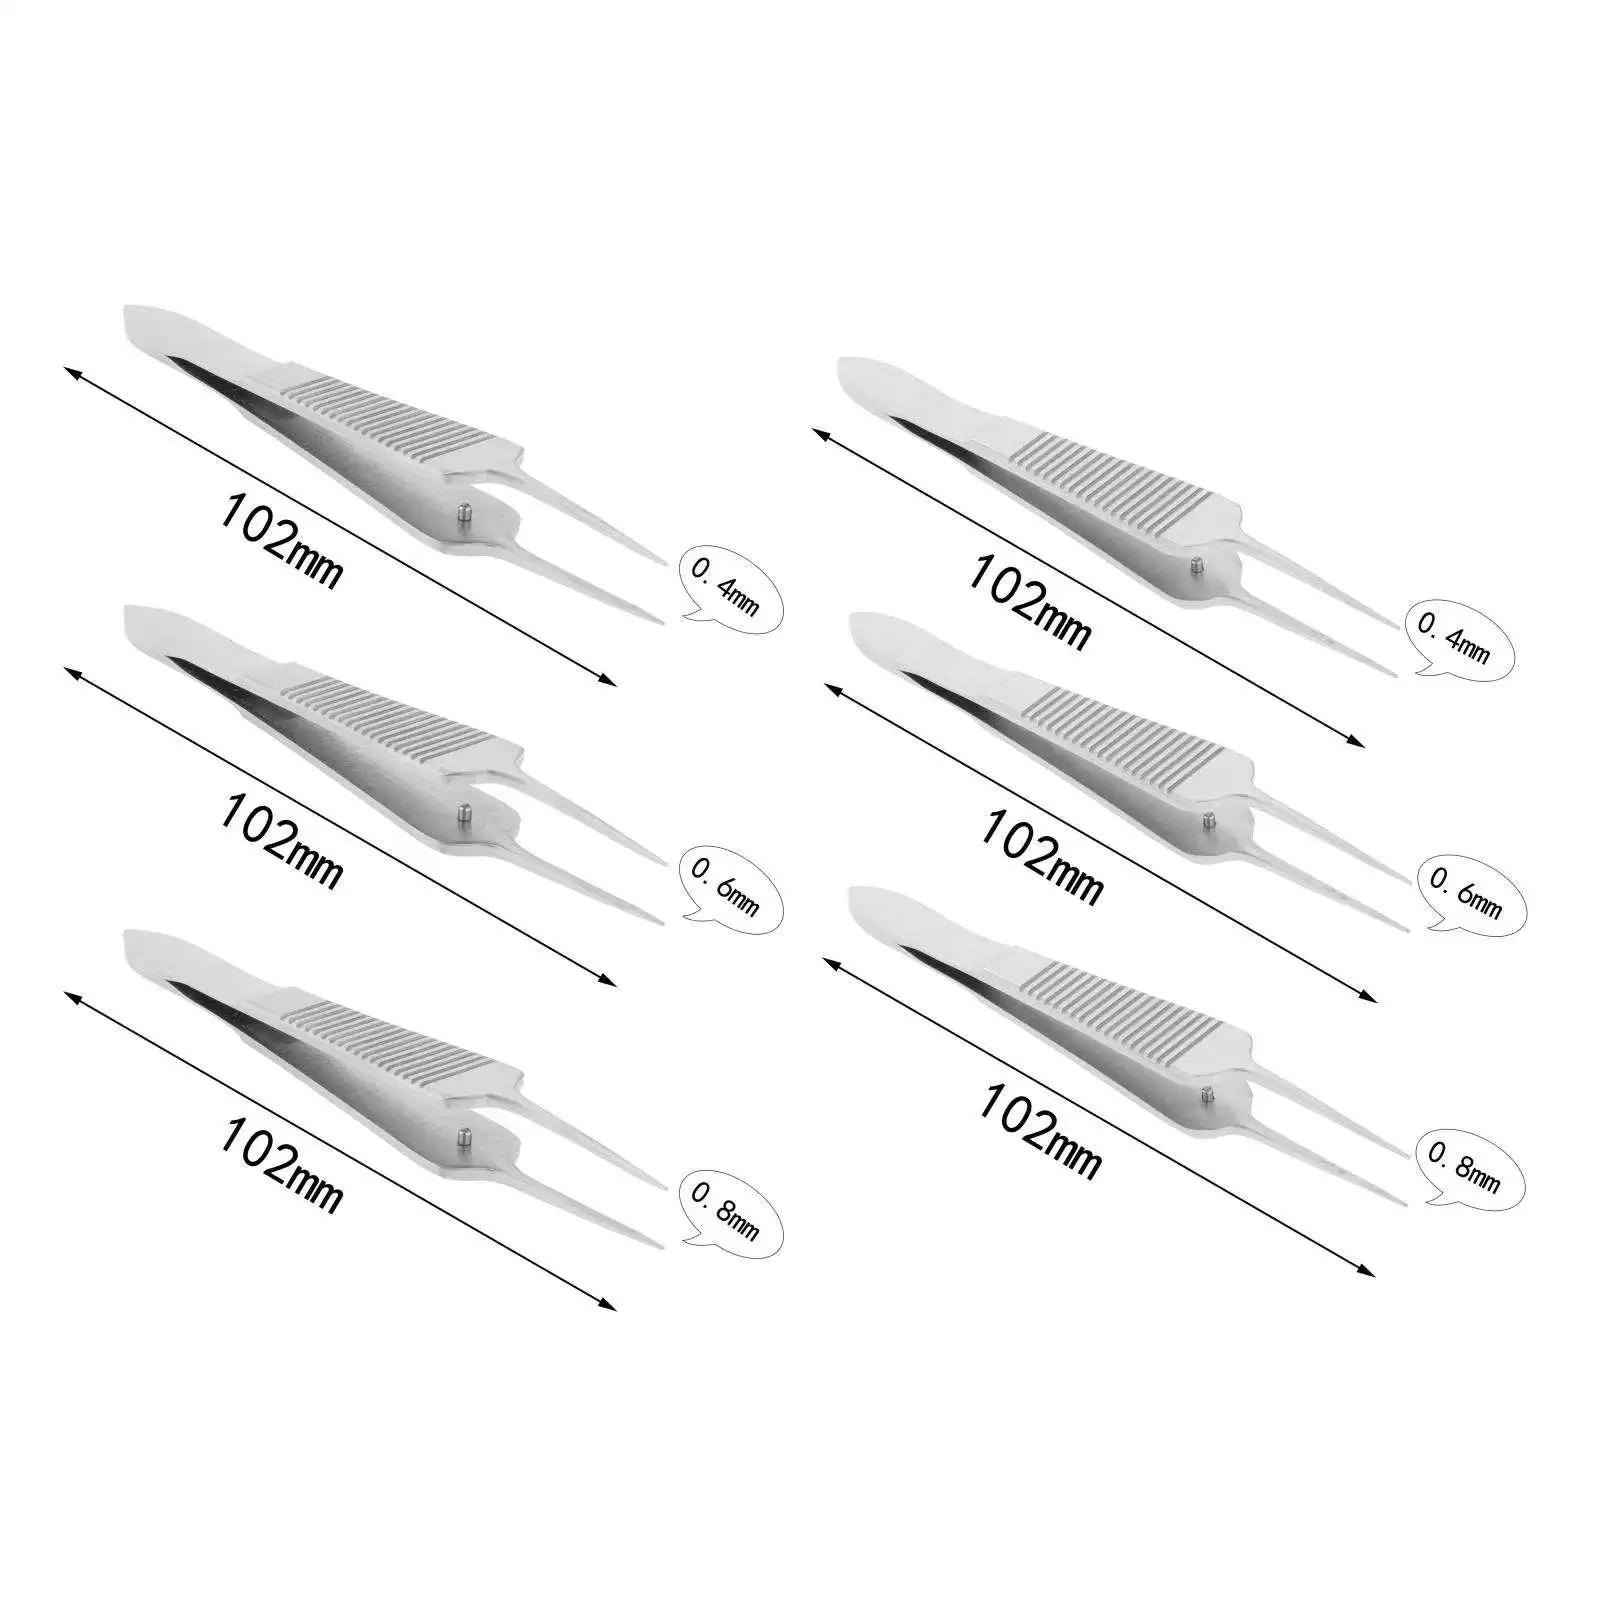 Micro Forceps Safety Use Pointed Short Tweezers for Cosmetic Surgery Hair Removal Hotel - Diameter 0.4 mm, Serrated 102mm